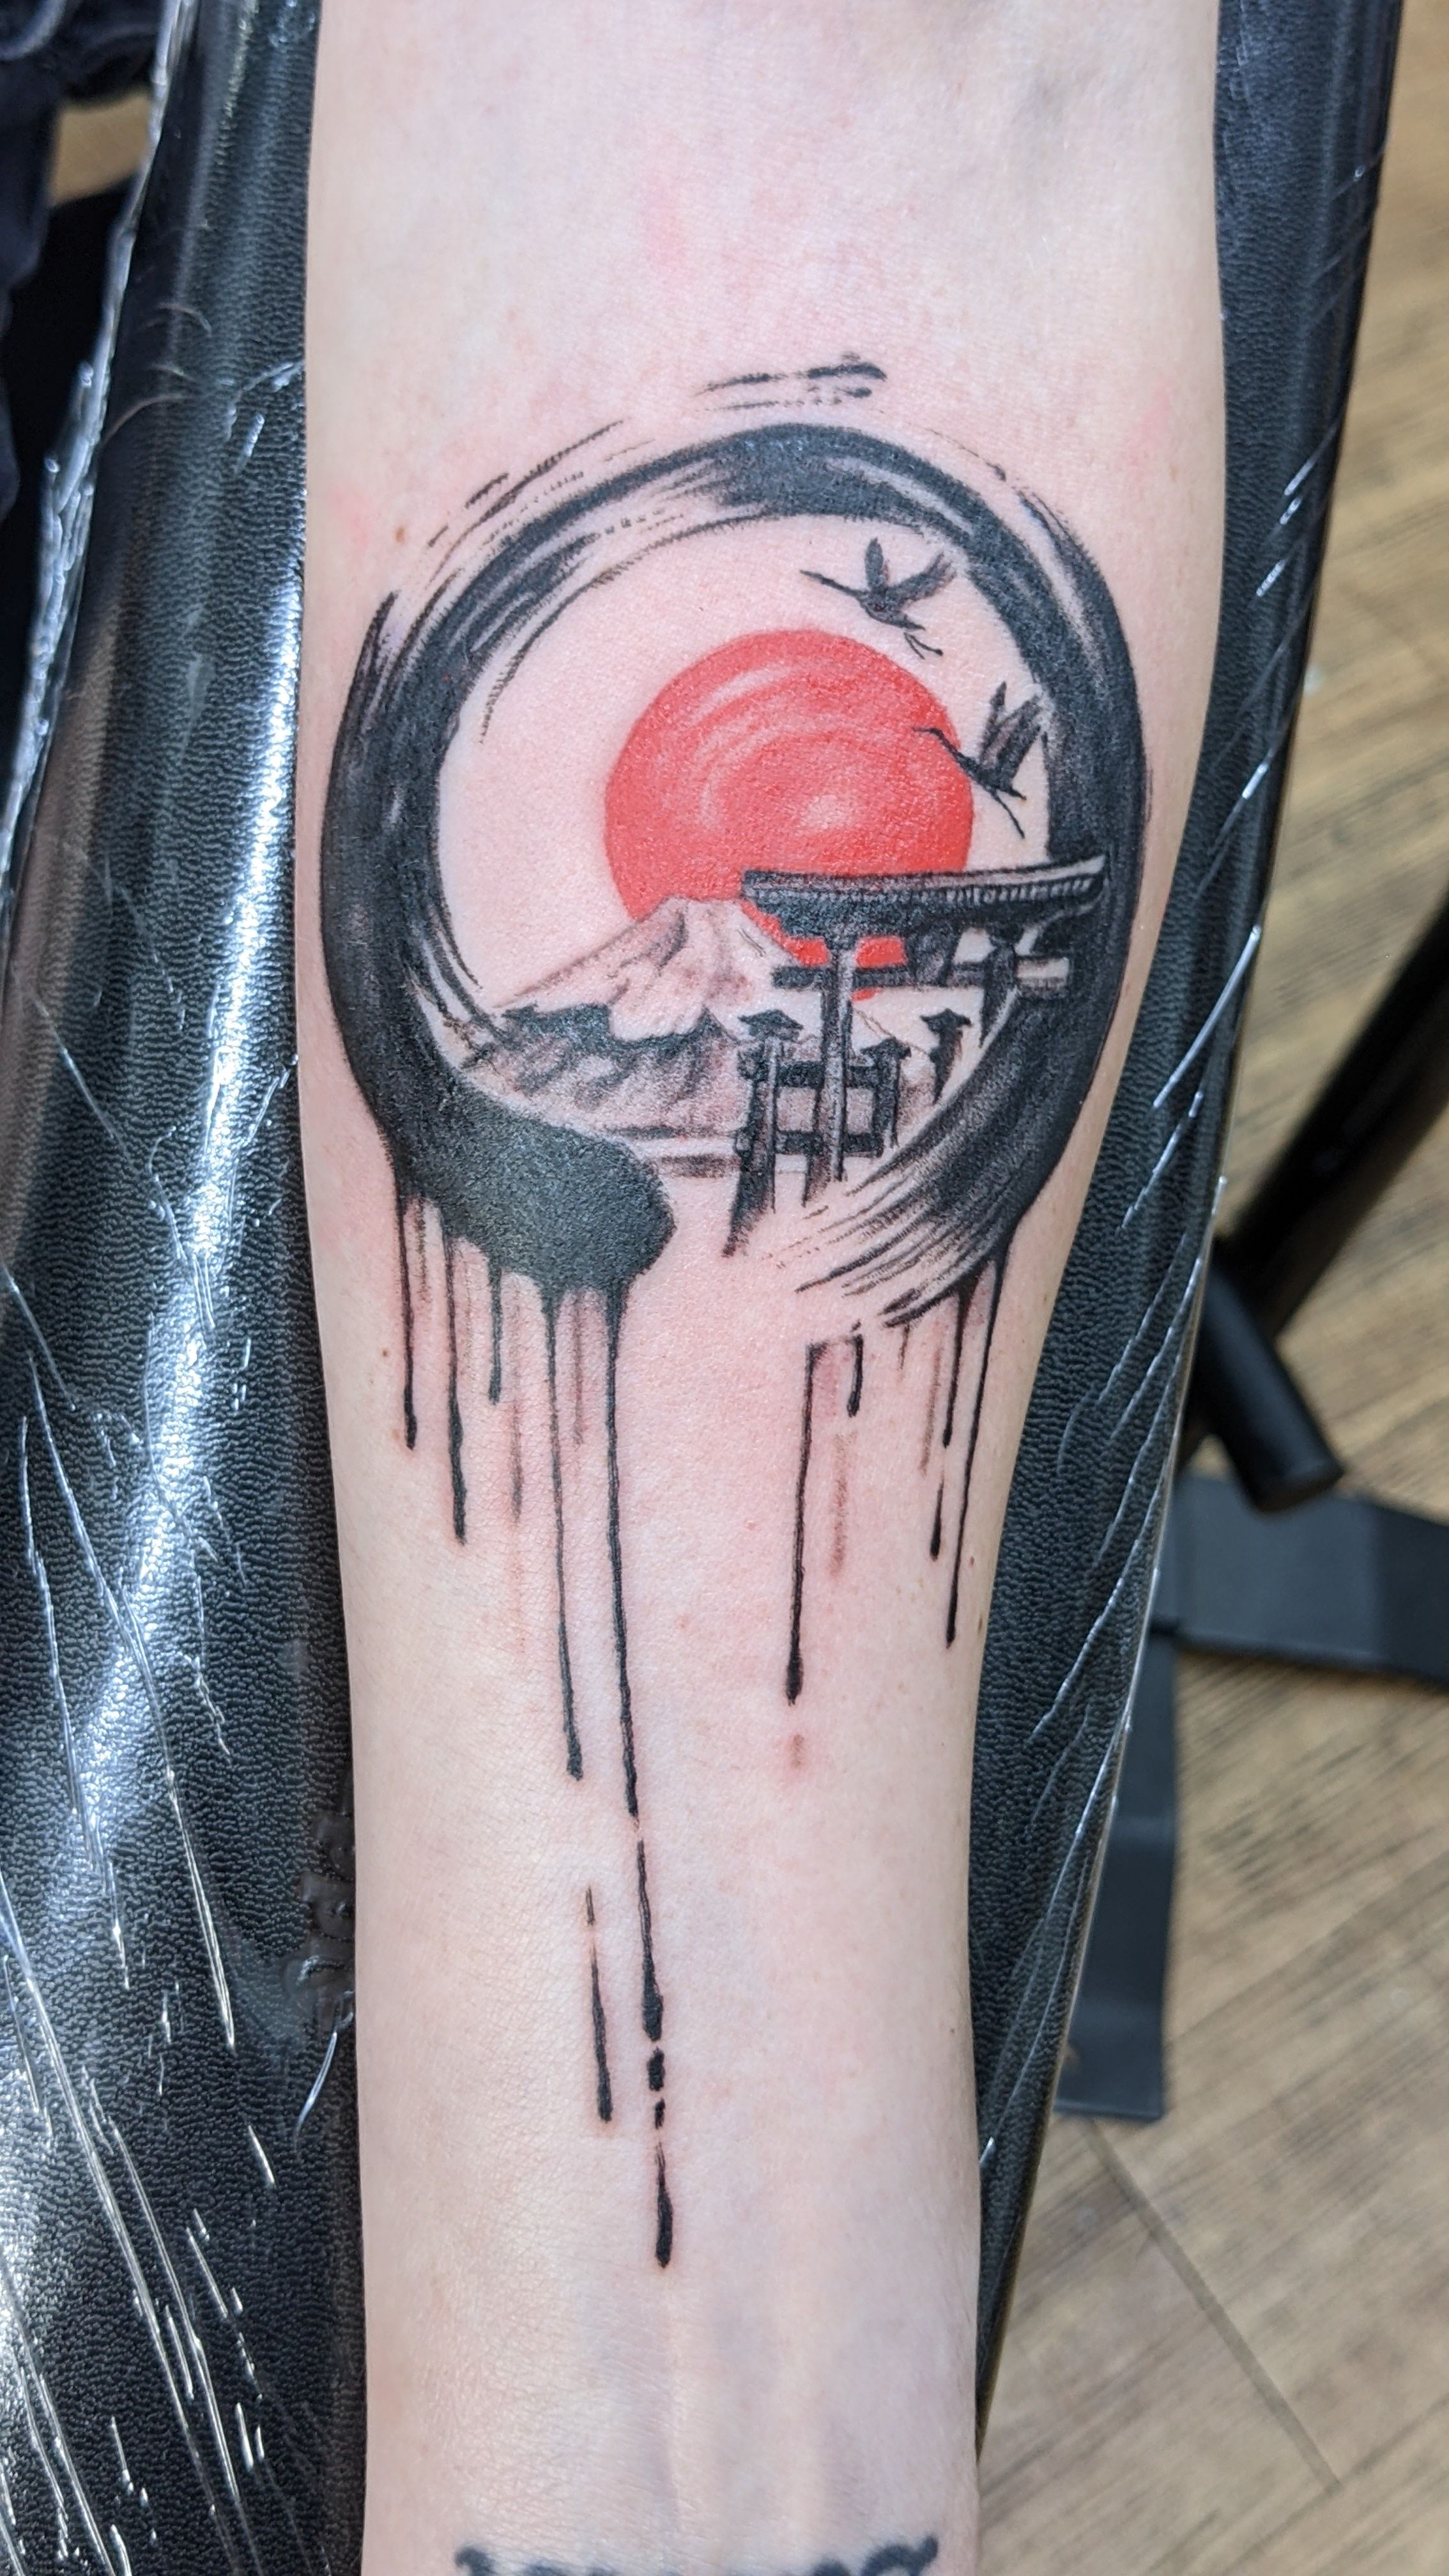 Tattoo uploaded by Mark Strong • Enso with Mt Fuji and cranes flying over  shrine. • Tattoodo